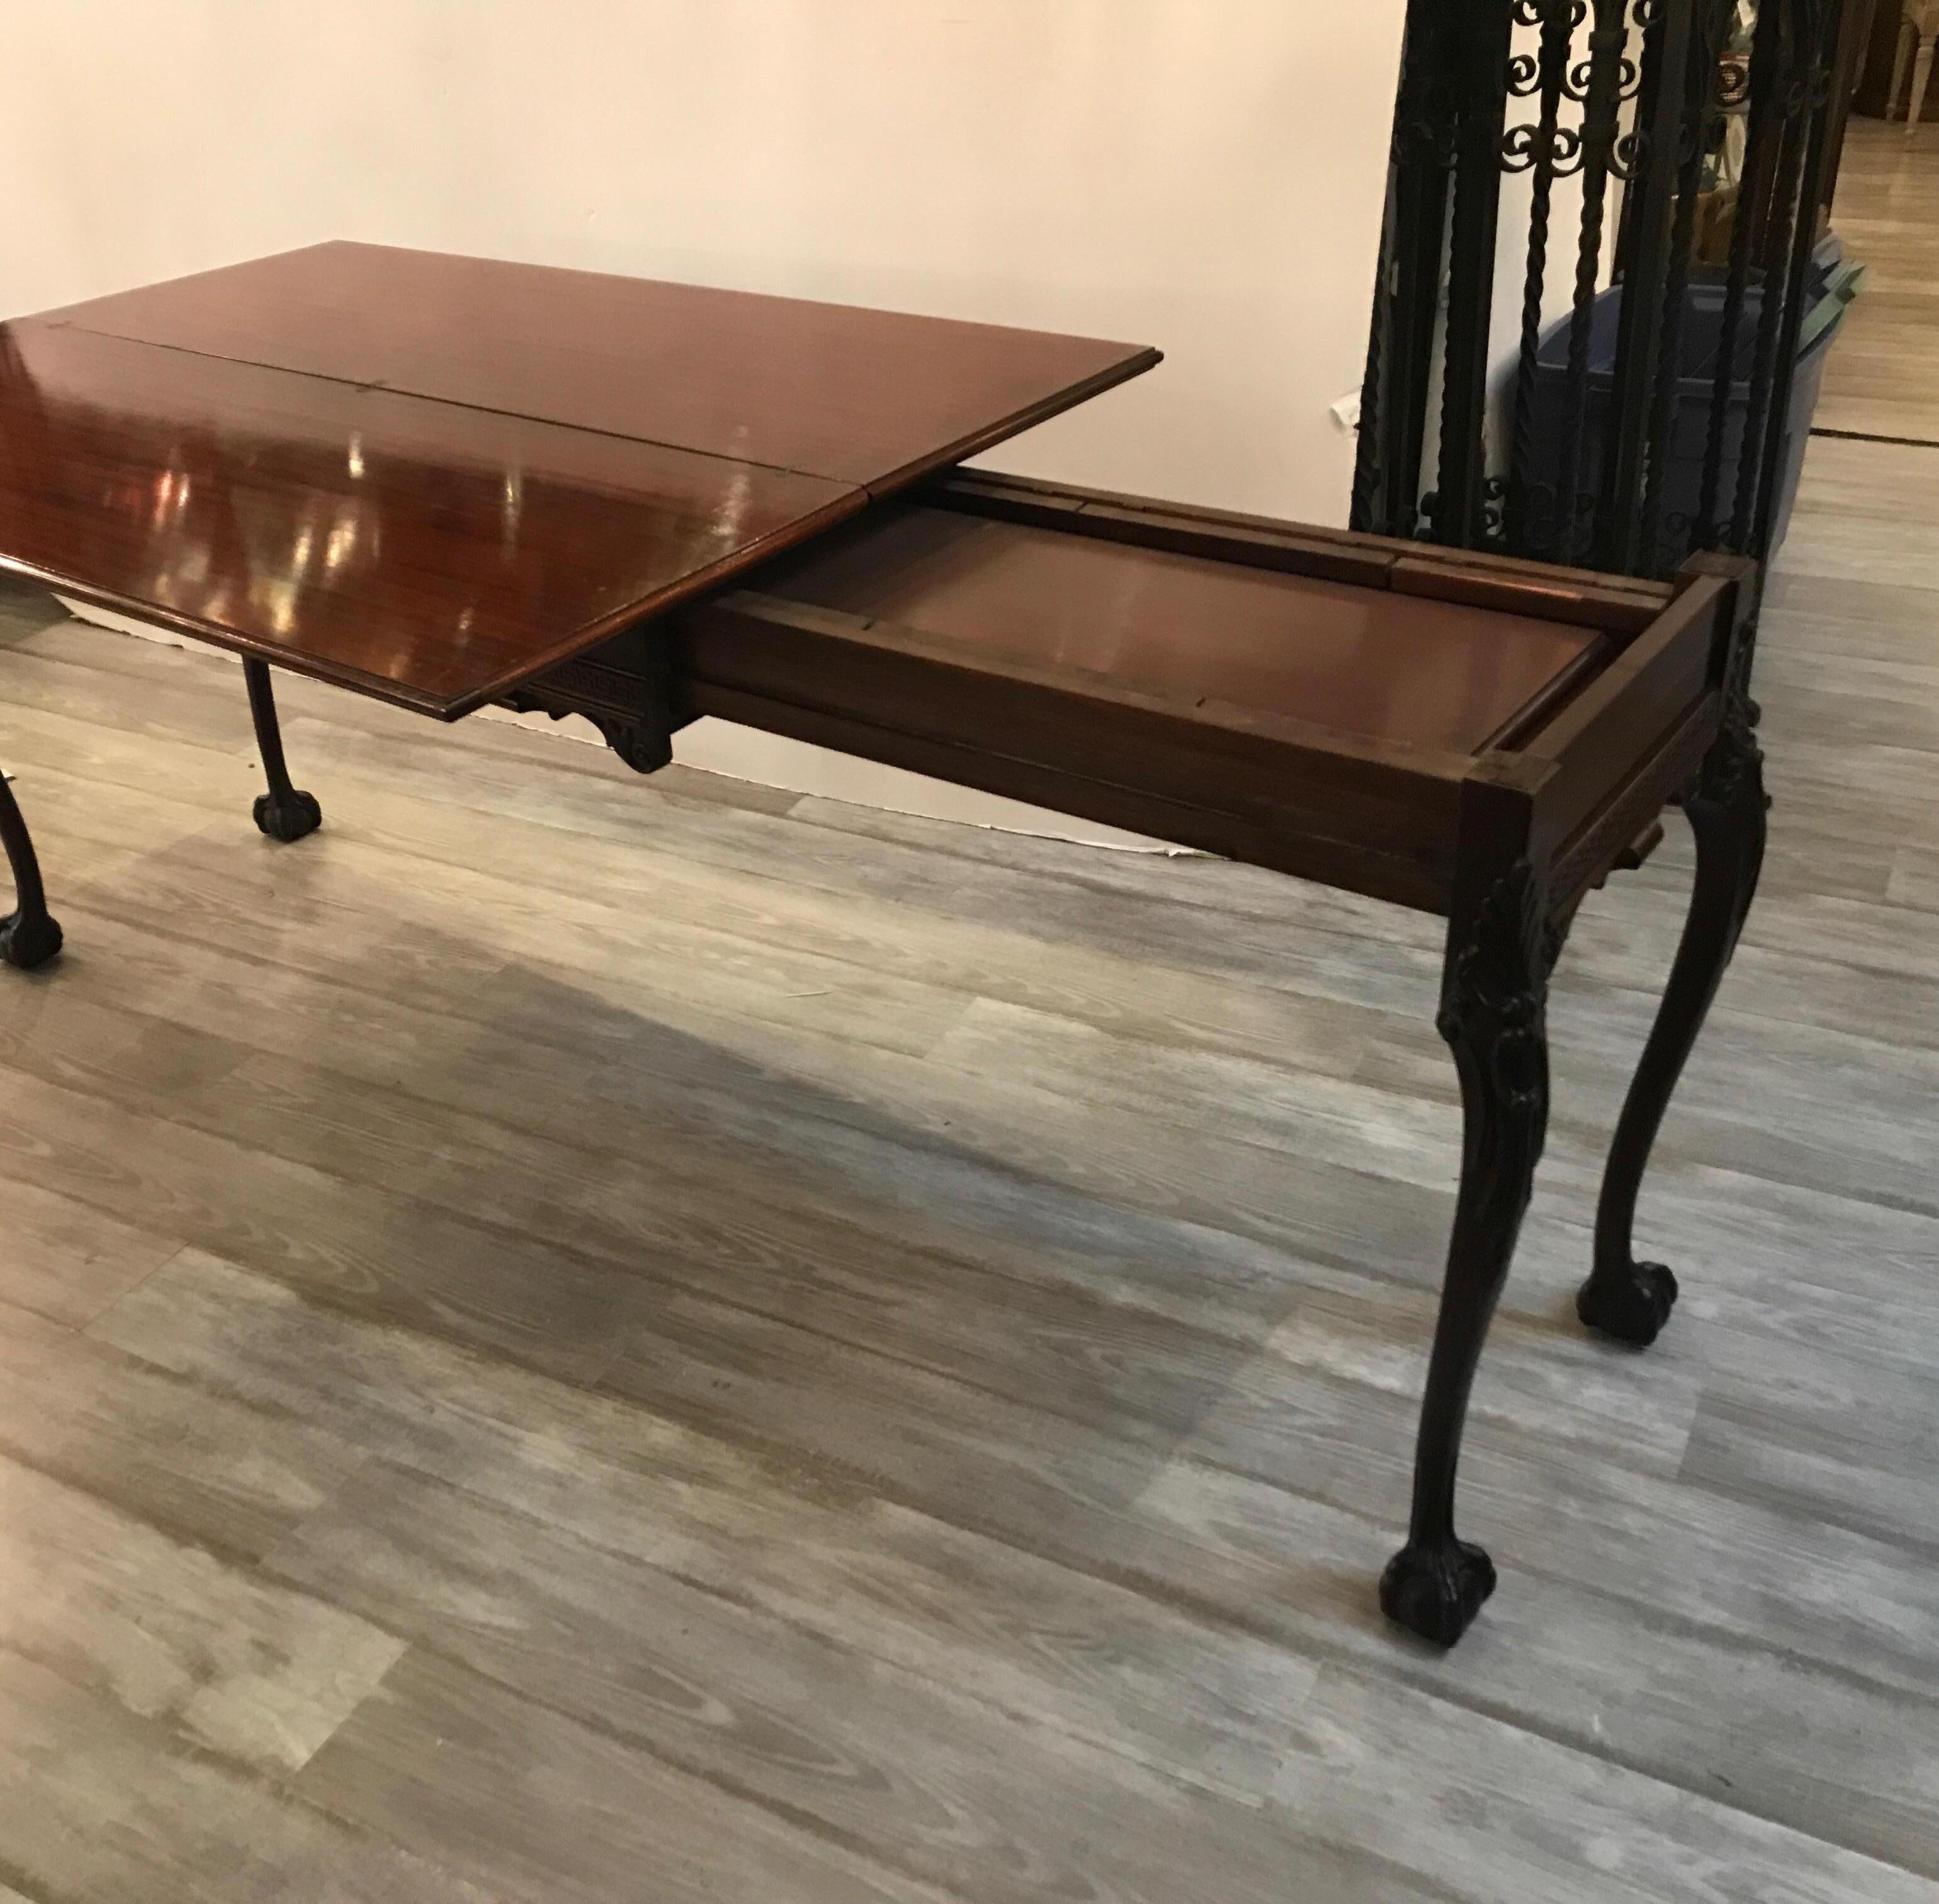 Hand Carved Mahogany Console Table Opens to a Dining Table 4